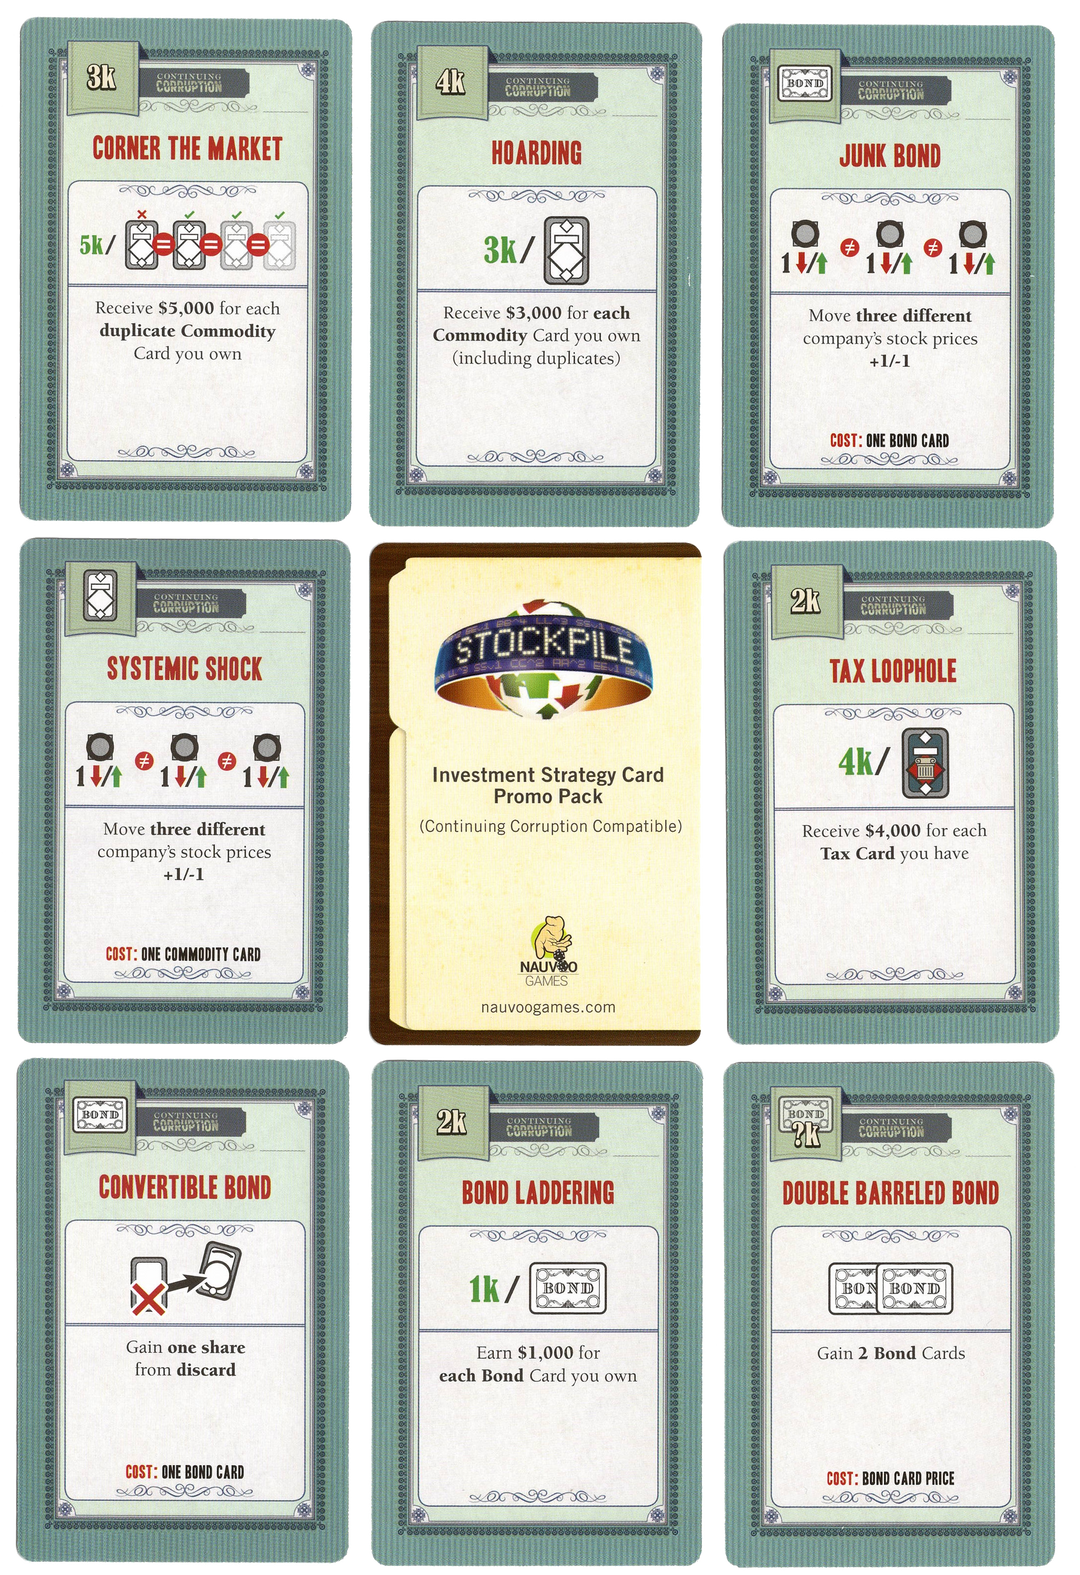 A collection of promo cards for use with the board game Stockpile, depicting names of different stock and trading terms at the top and a collection of symbols and text at the bottom.